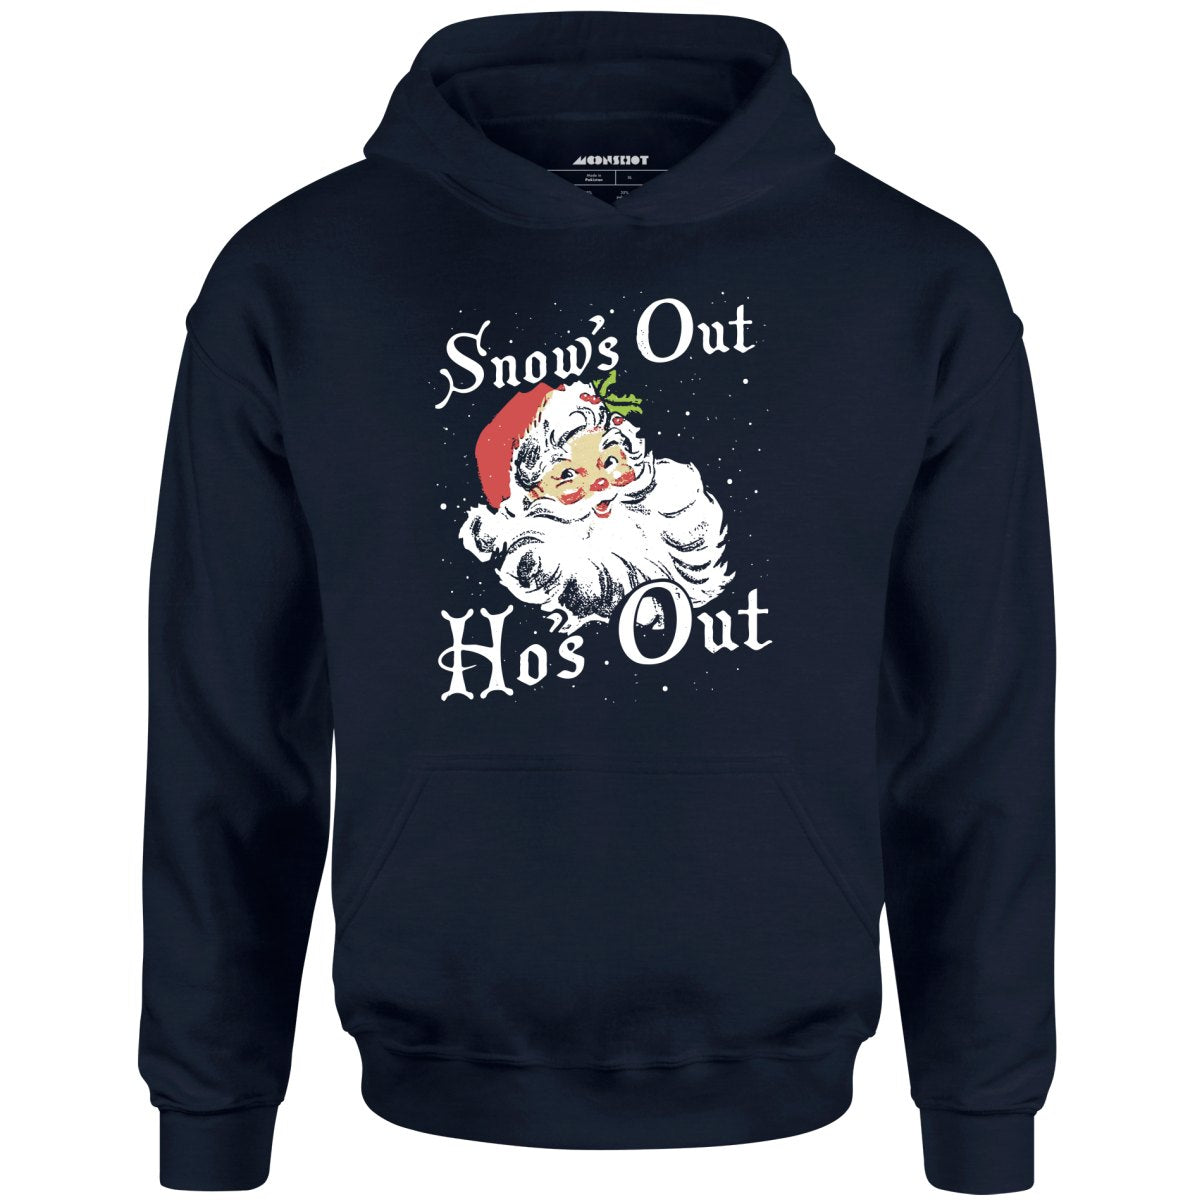 Snow's Out Ho's Out - Unisex Hoodie